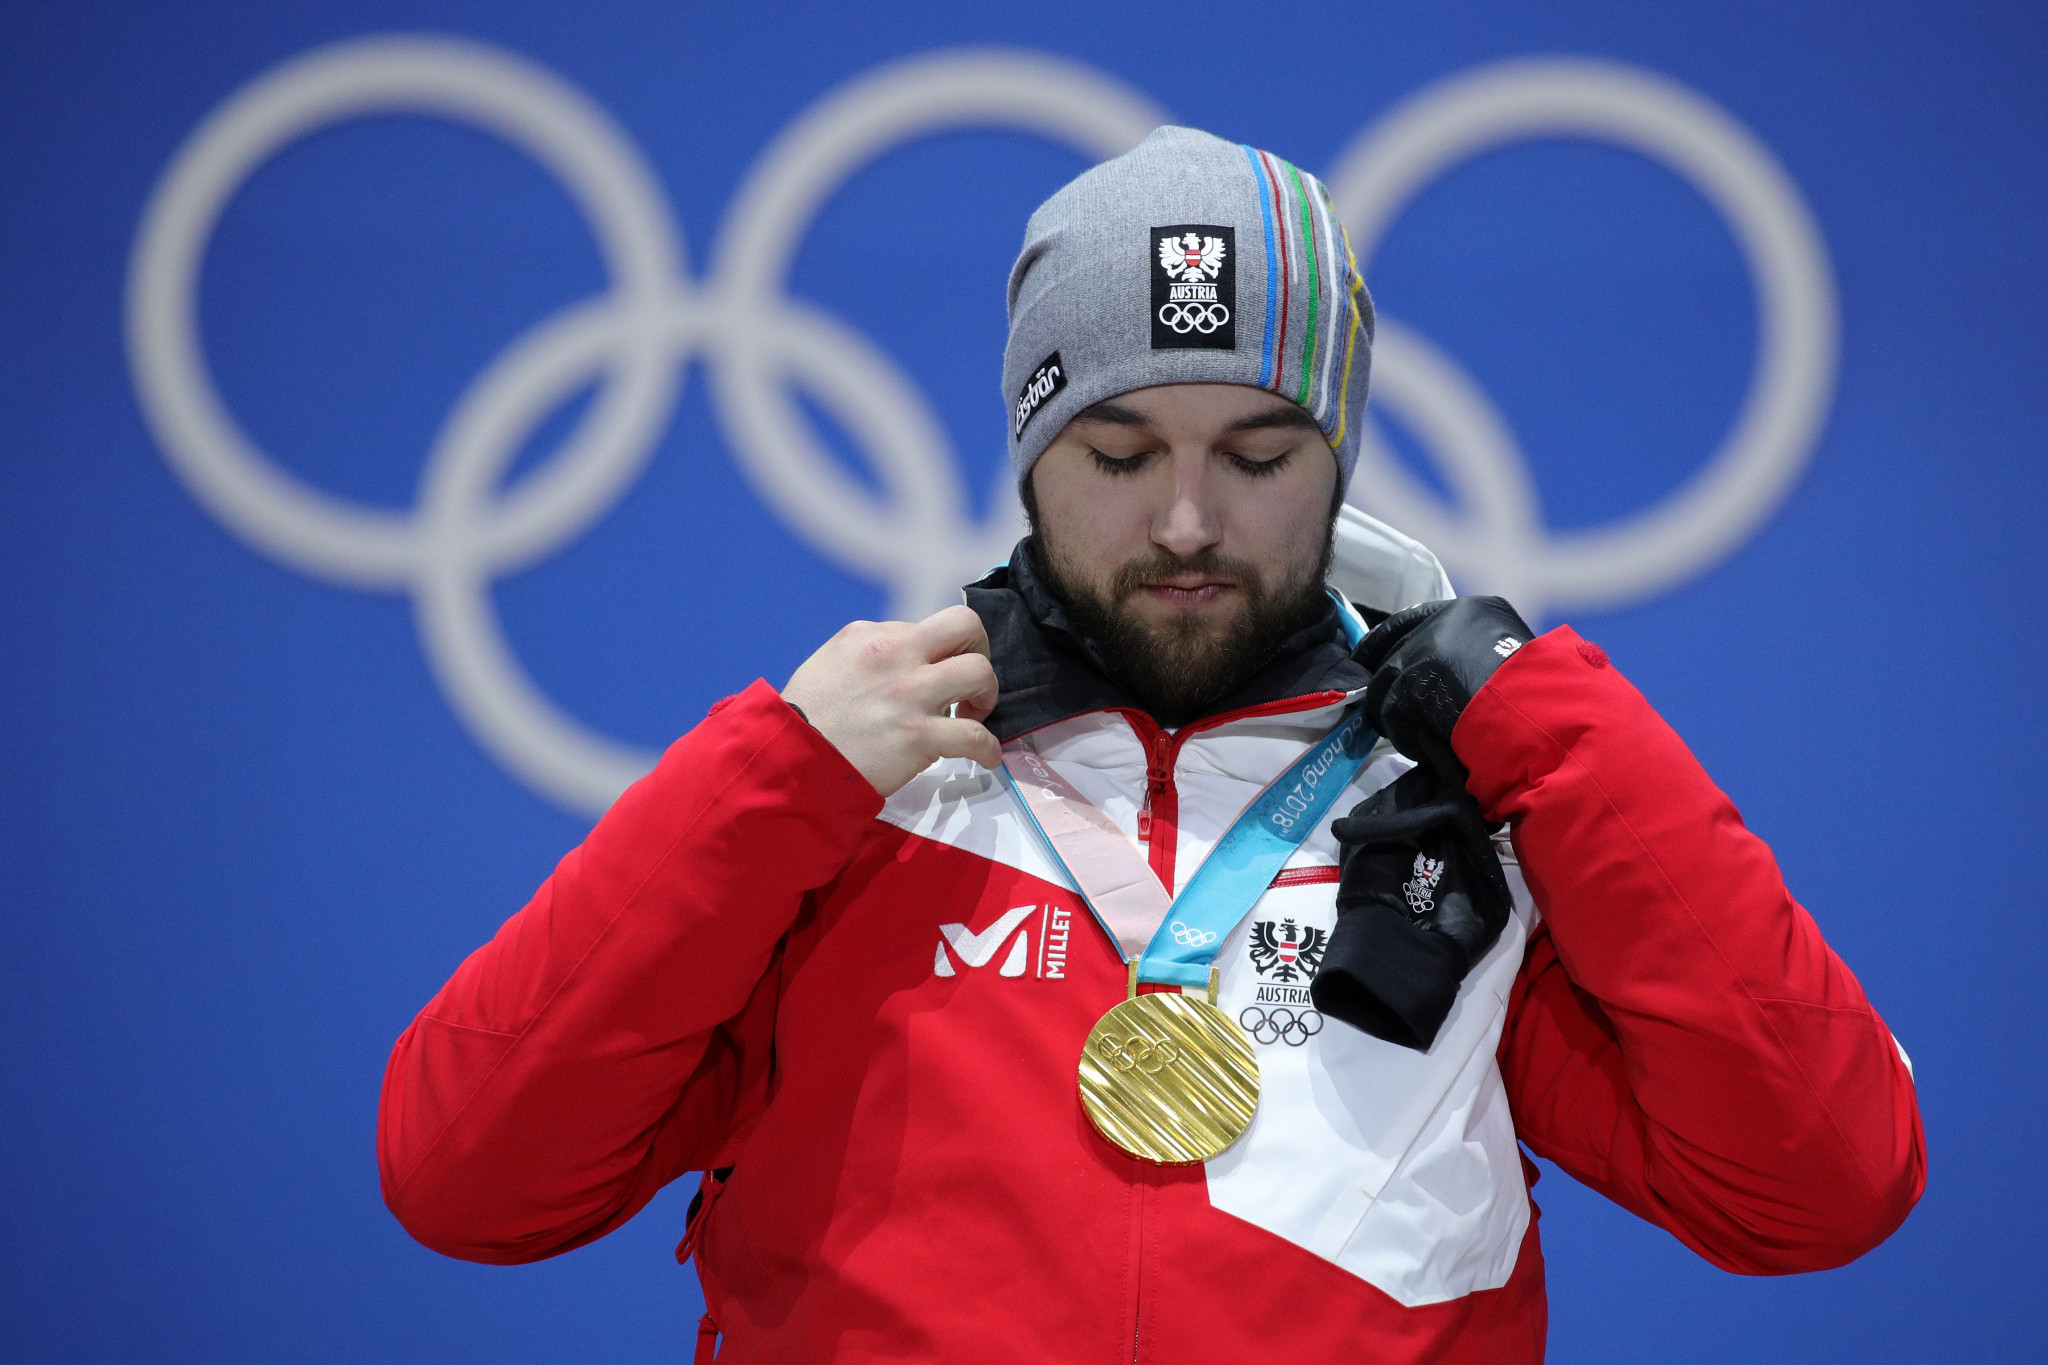 David Gleirscher won a surprise men's luge gold medal for Austria at the Pyeongchang 2018 Winter Olympics in South Korea in February ©Getty Images